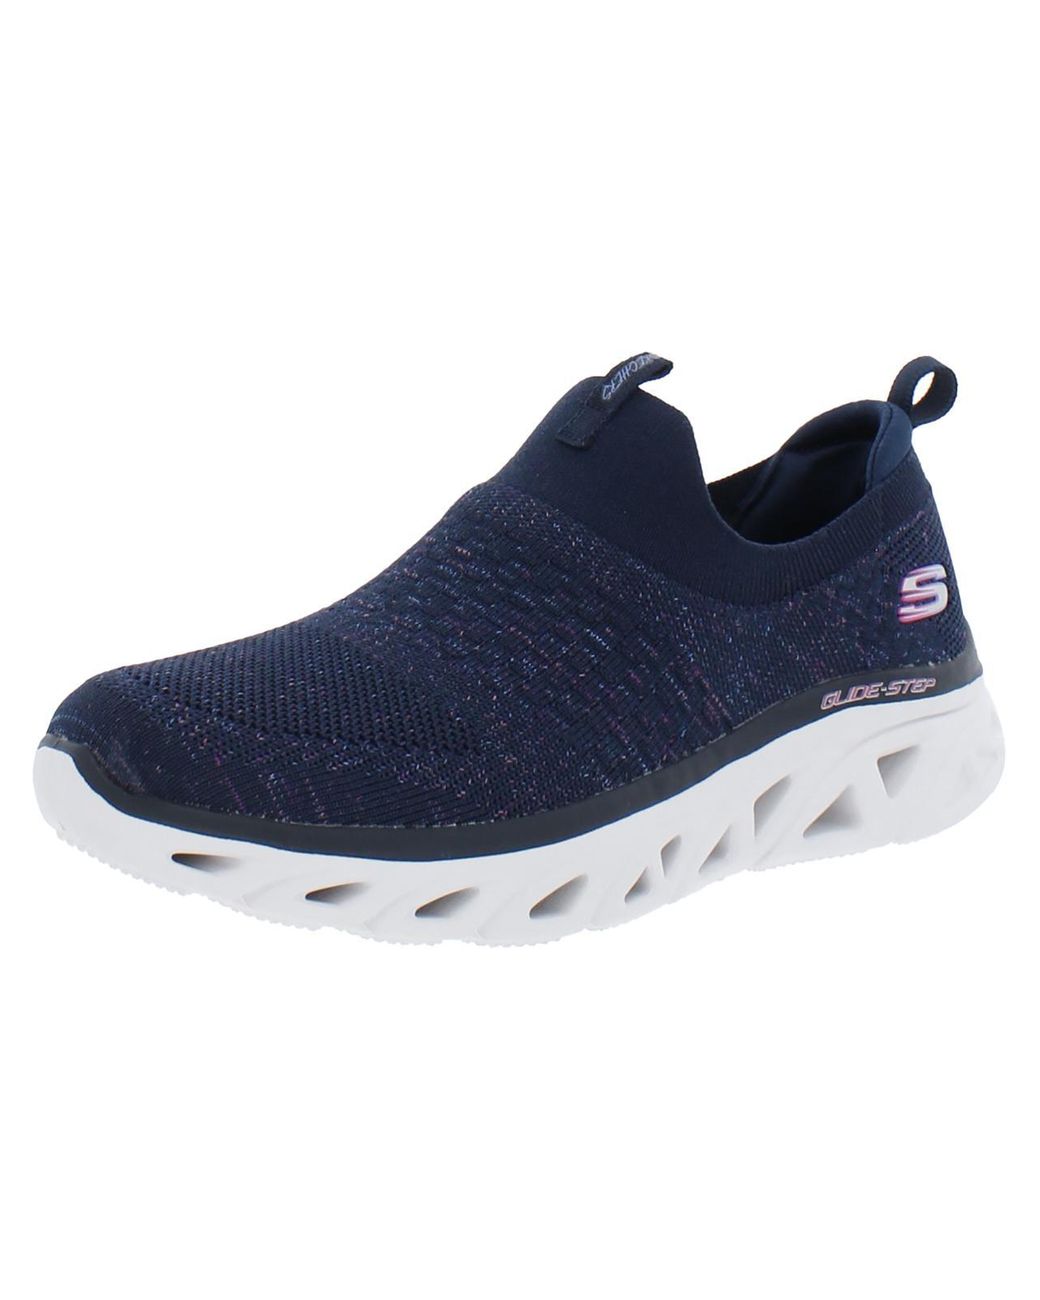 Skechers Glide Step Sport- Lively Glow Relaxed Fit Slip On Walking Shoes in  Blue | Lyst